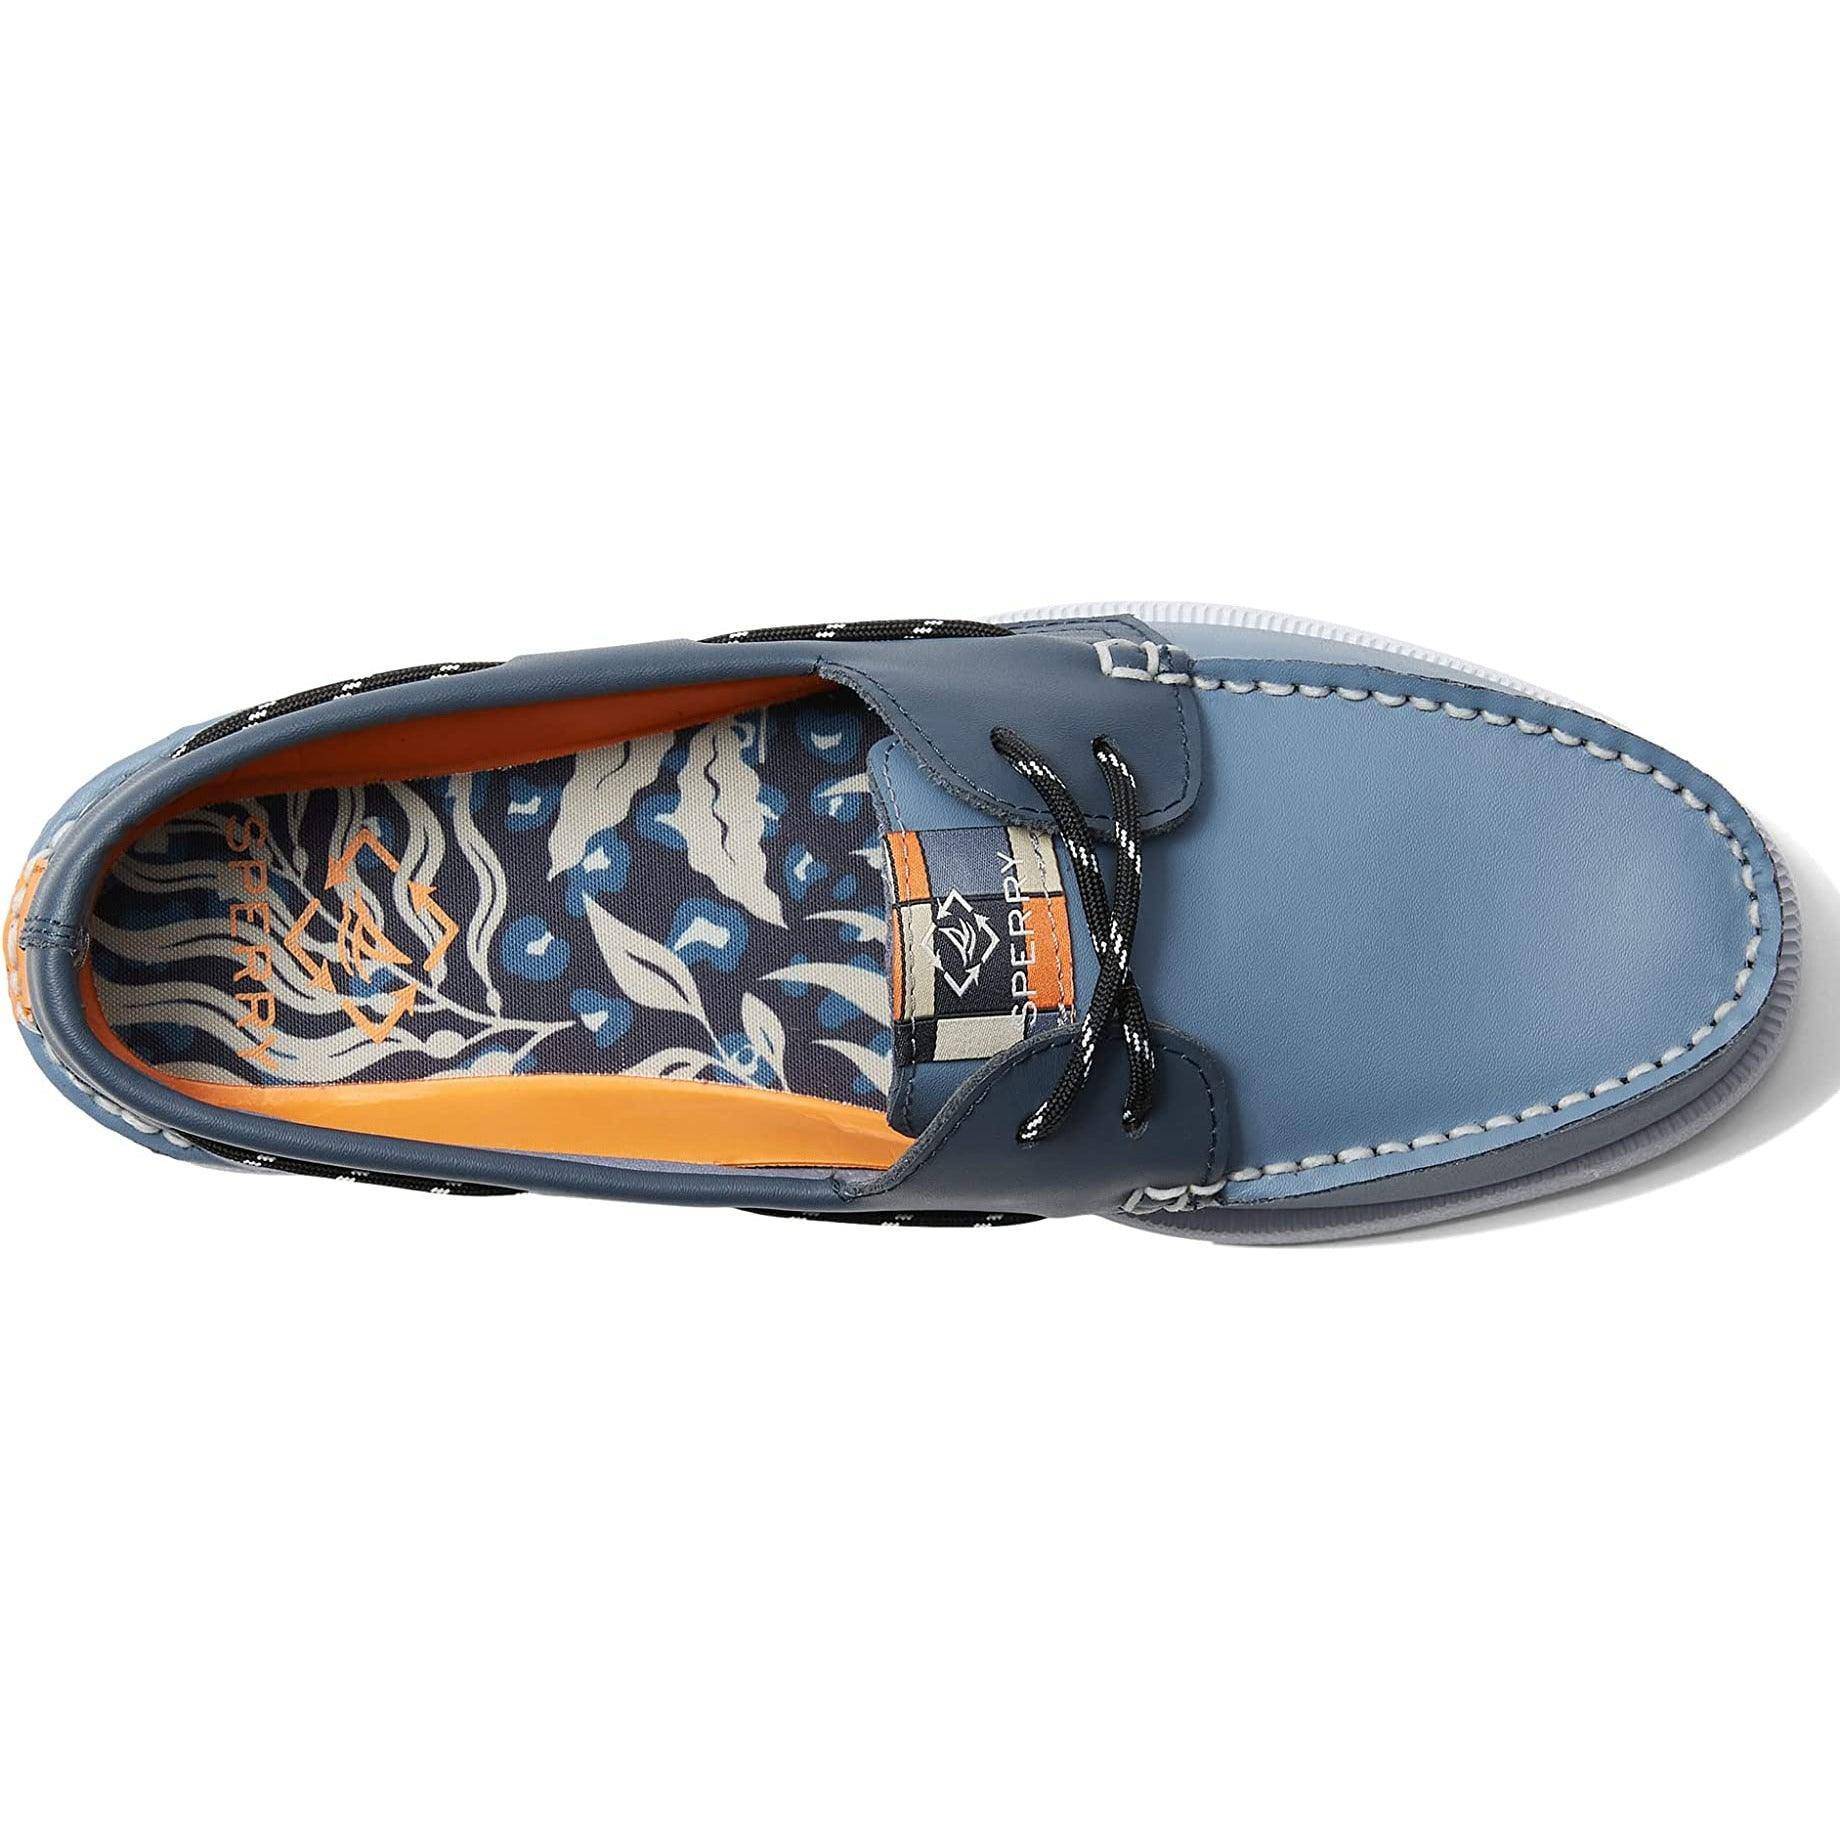 A/O 2-Eye Seacycled Boat Shoe - The Shoe Collective